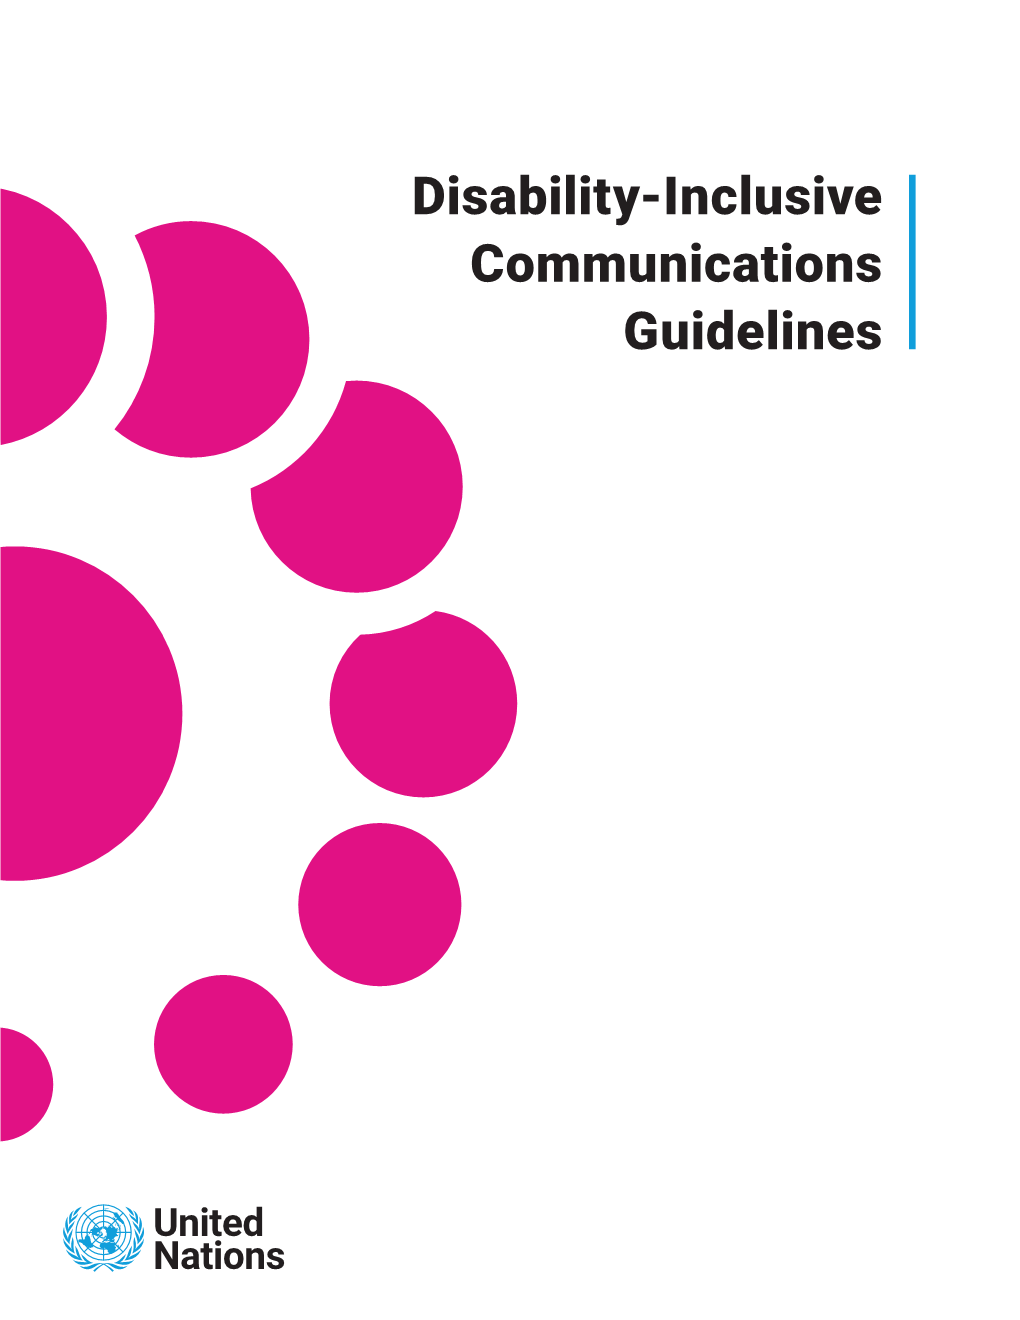 Disability-Inclusive Communications Guidelines